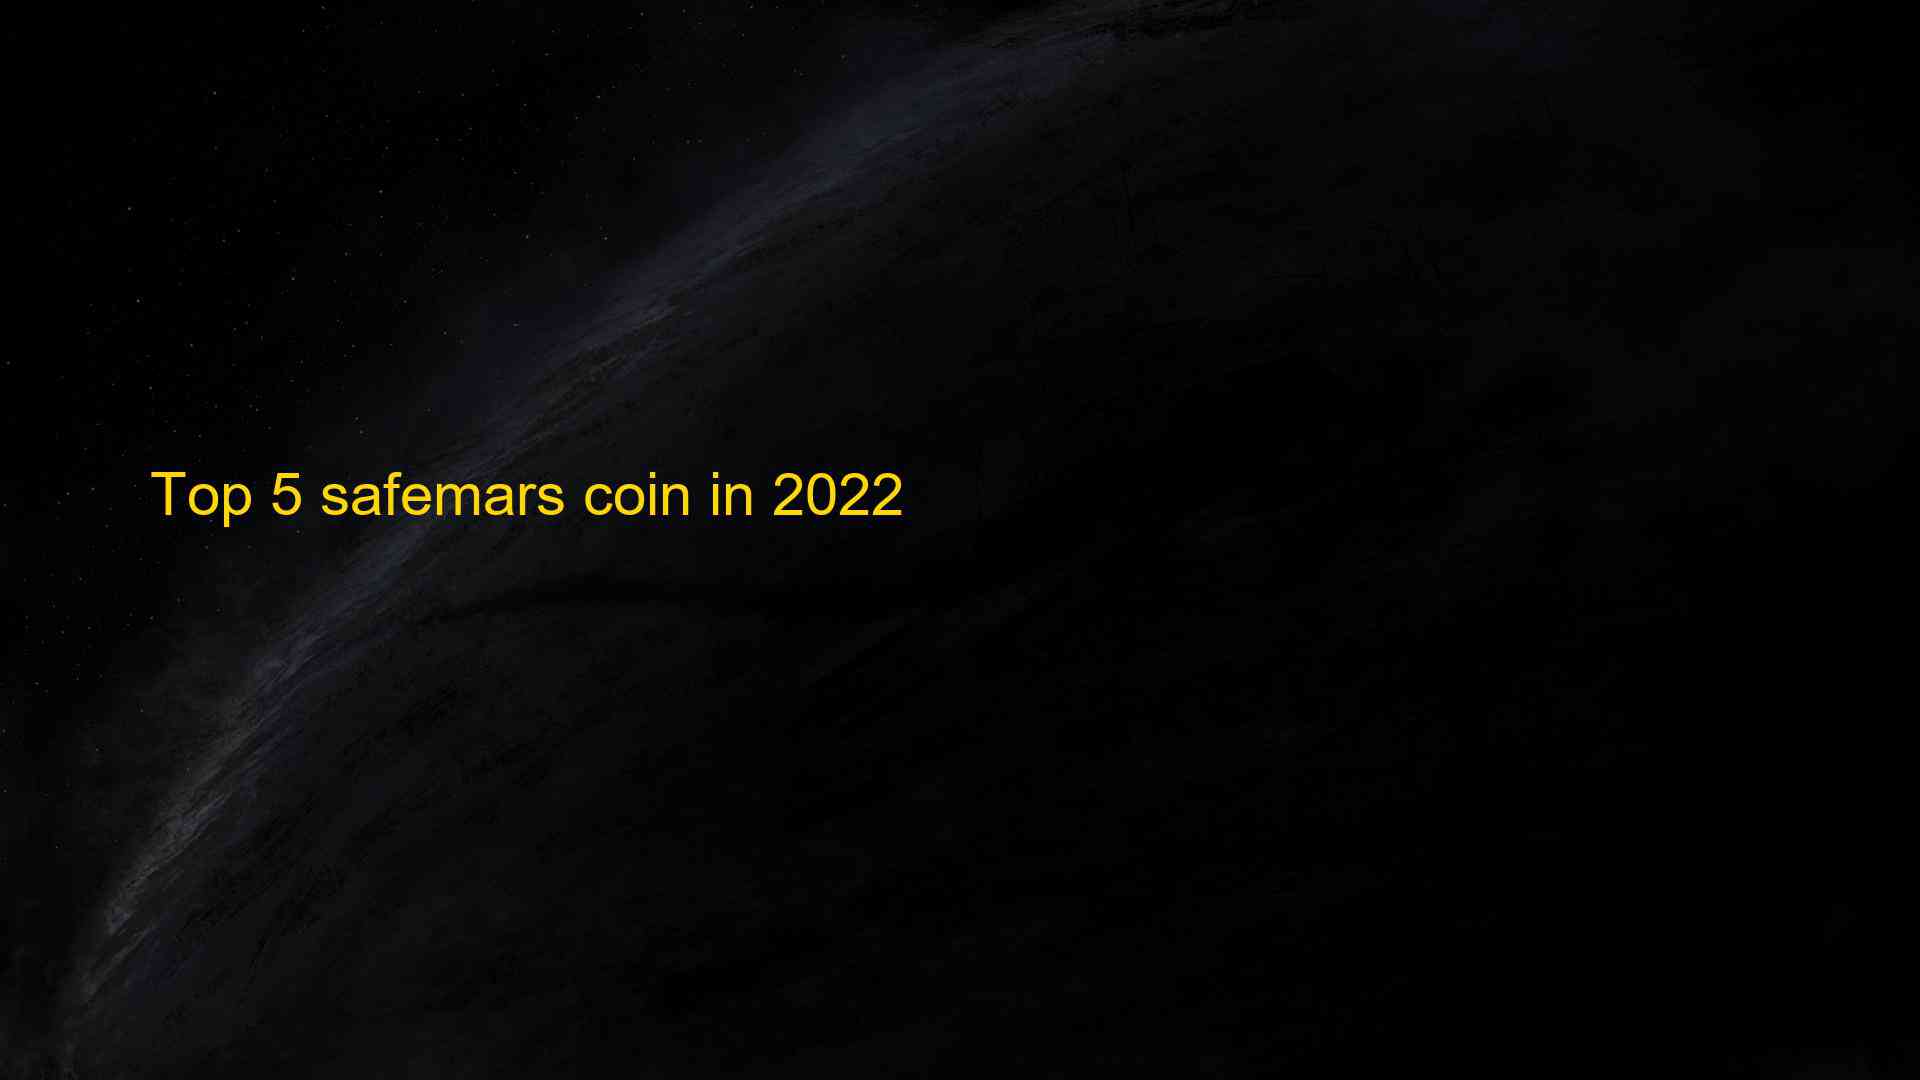 Top 5 safemars coin in 2022 1659563712